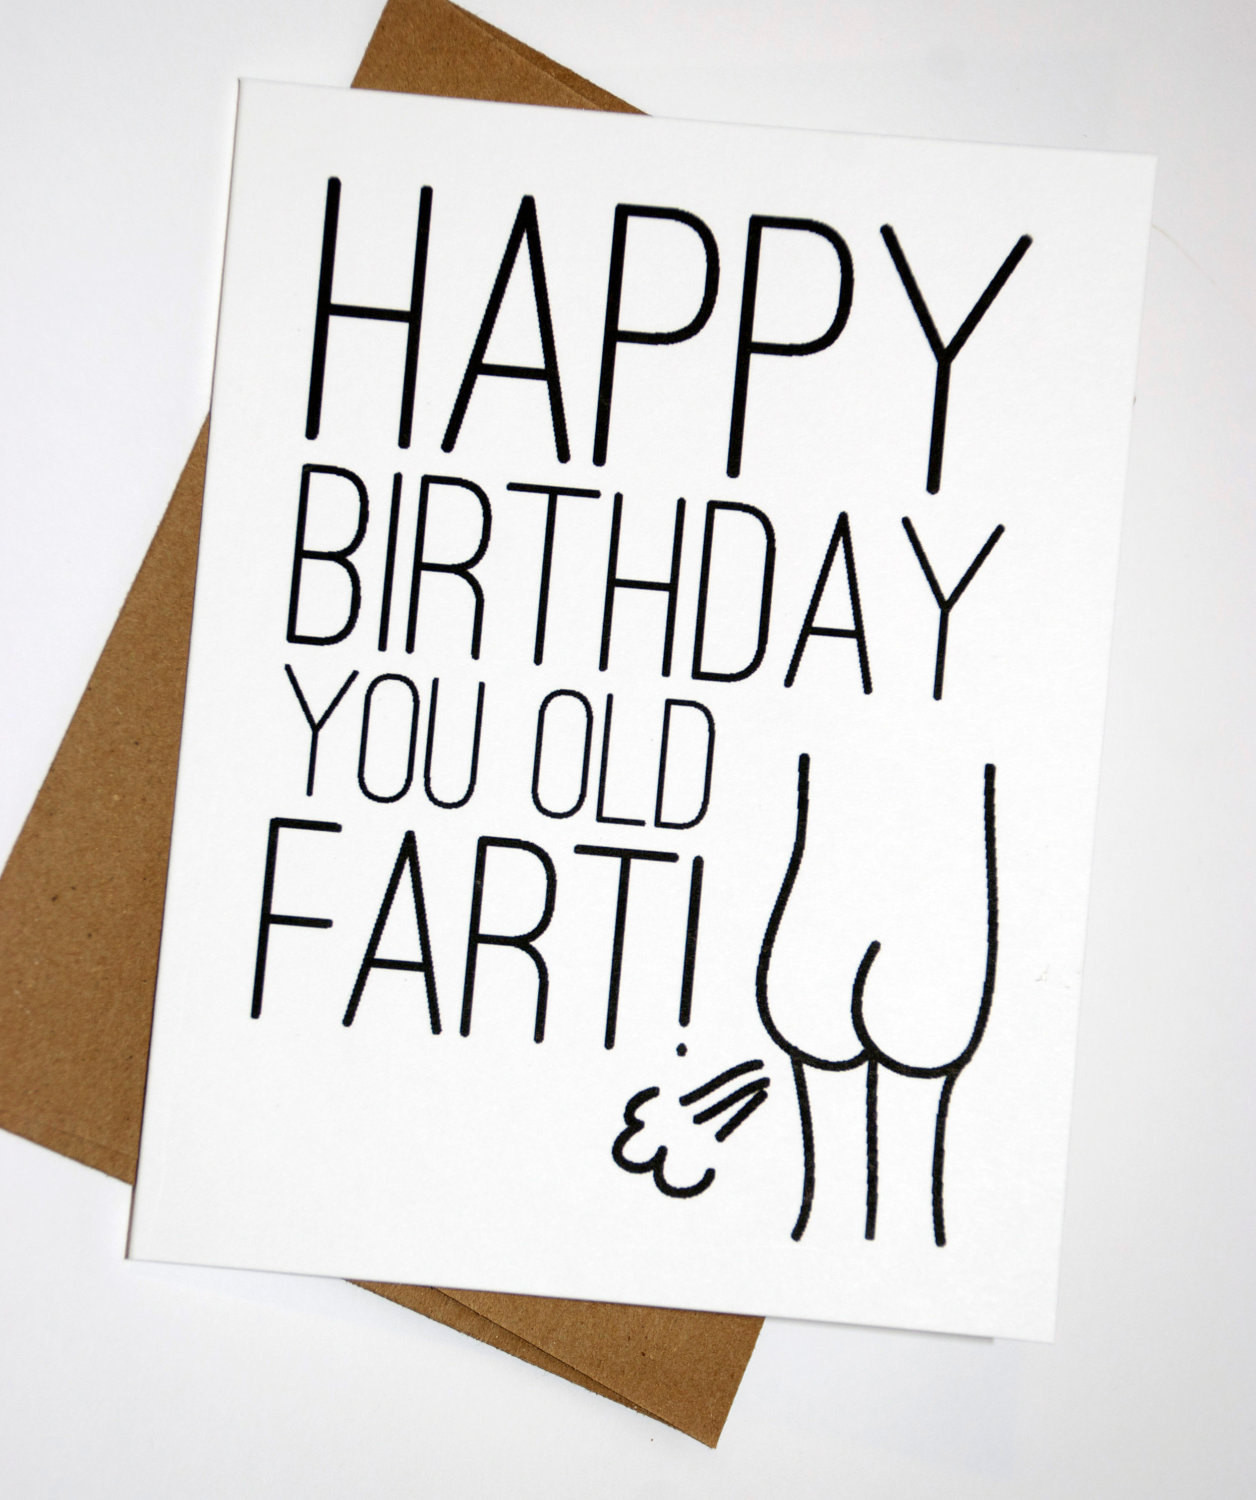 Happy Birthday Cards Funny
 Funny Birthday Card Happy Birthday You Old Fart by RowHouse14